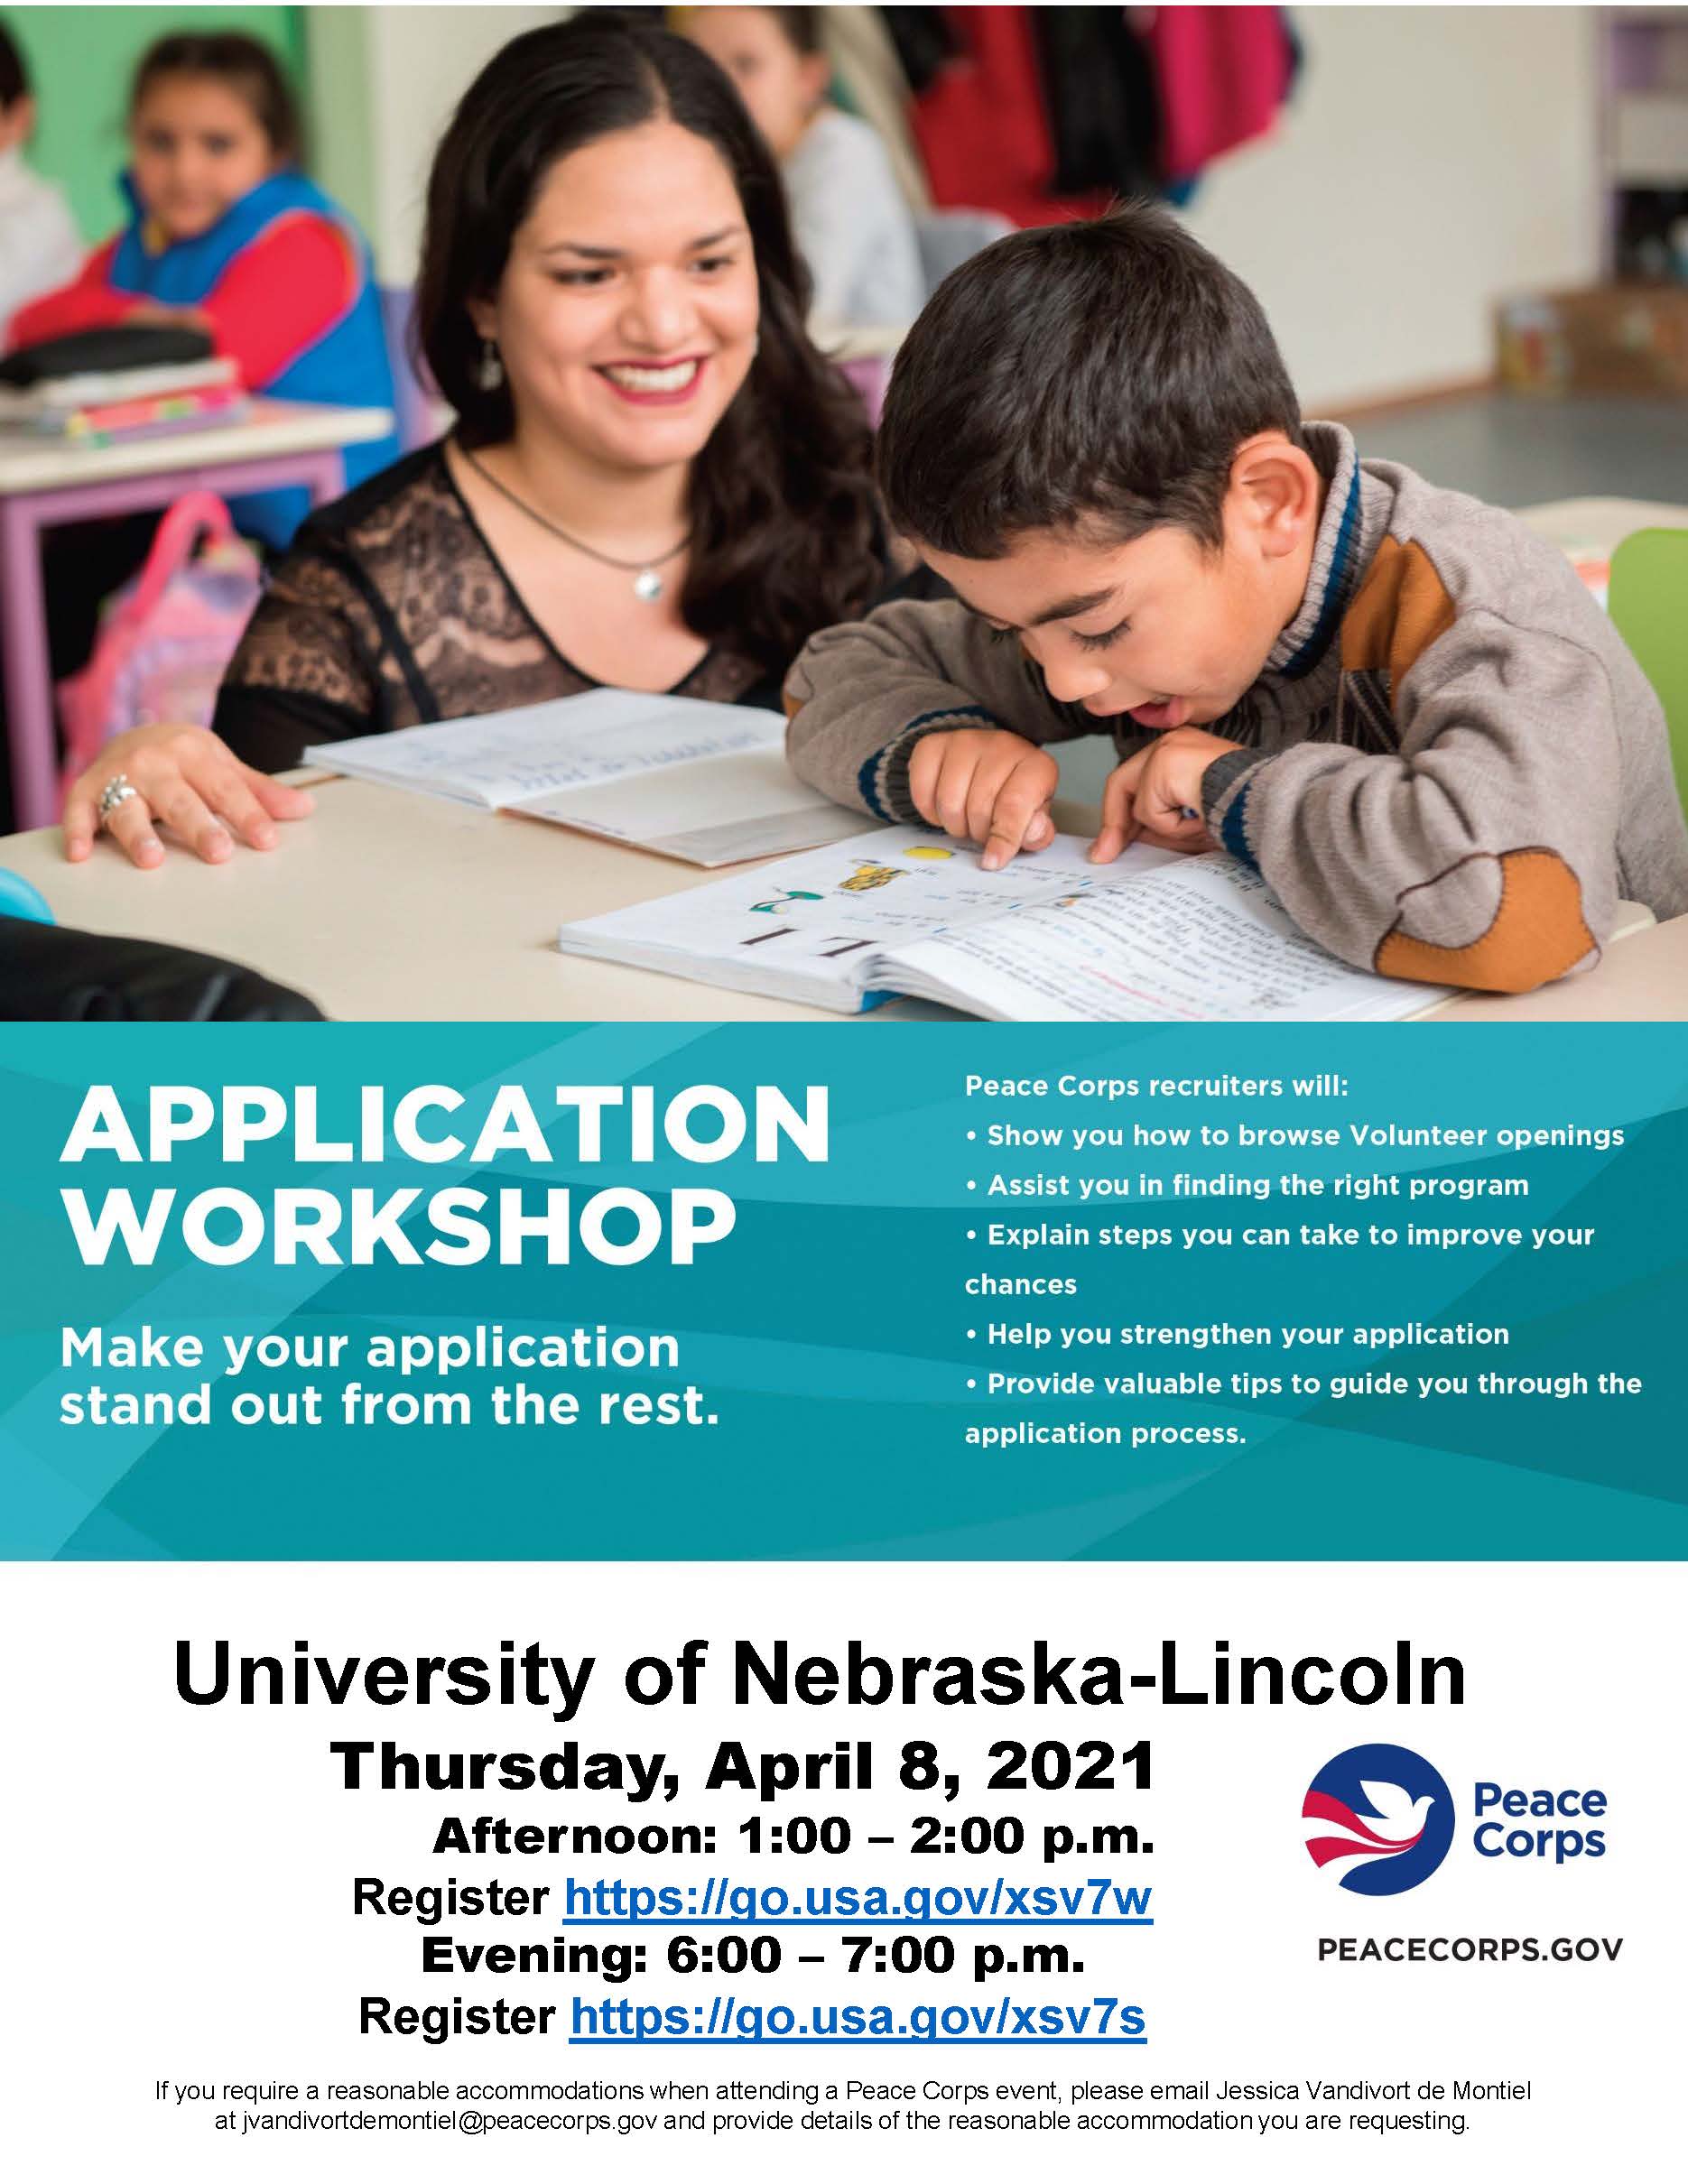 Application Workshop with Peace Corps